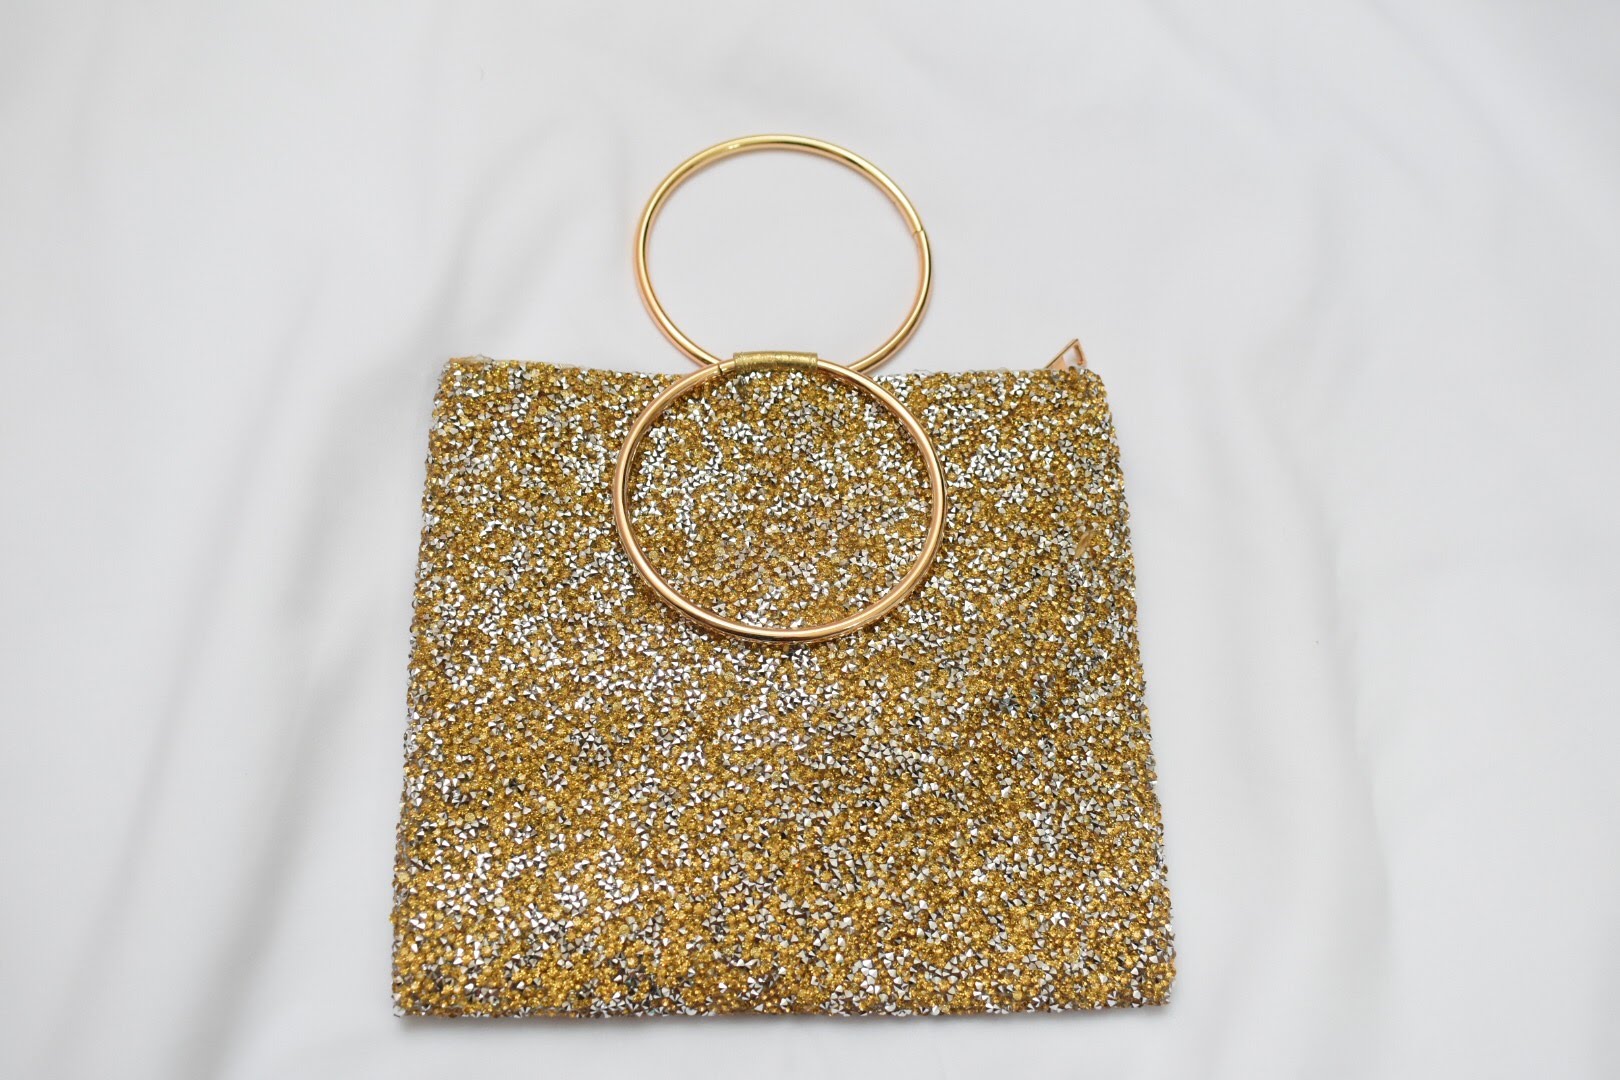 Gold colored - Sparkly Hand Purse - with metal ring handle